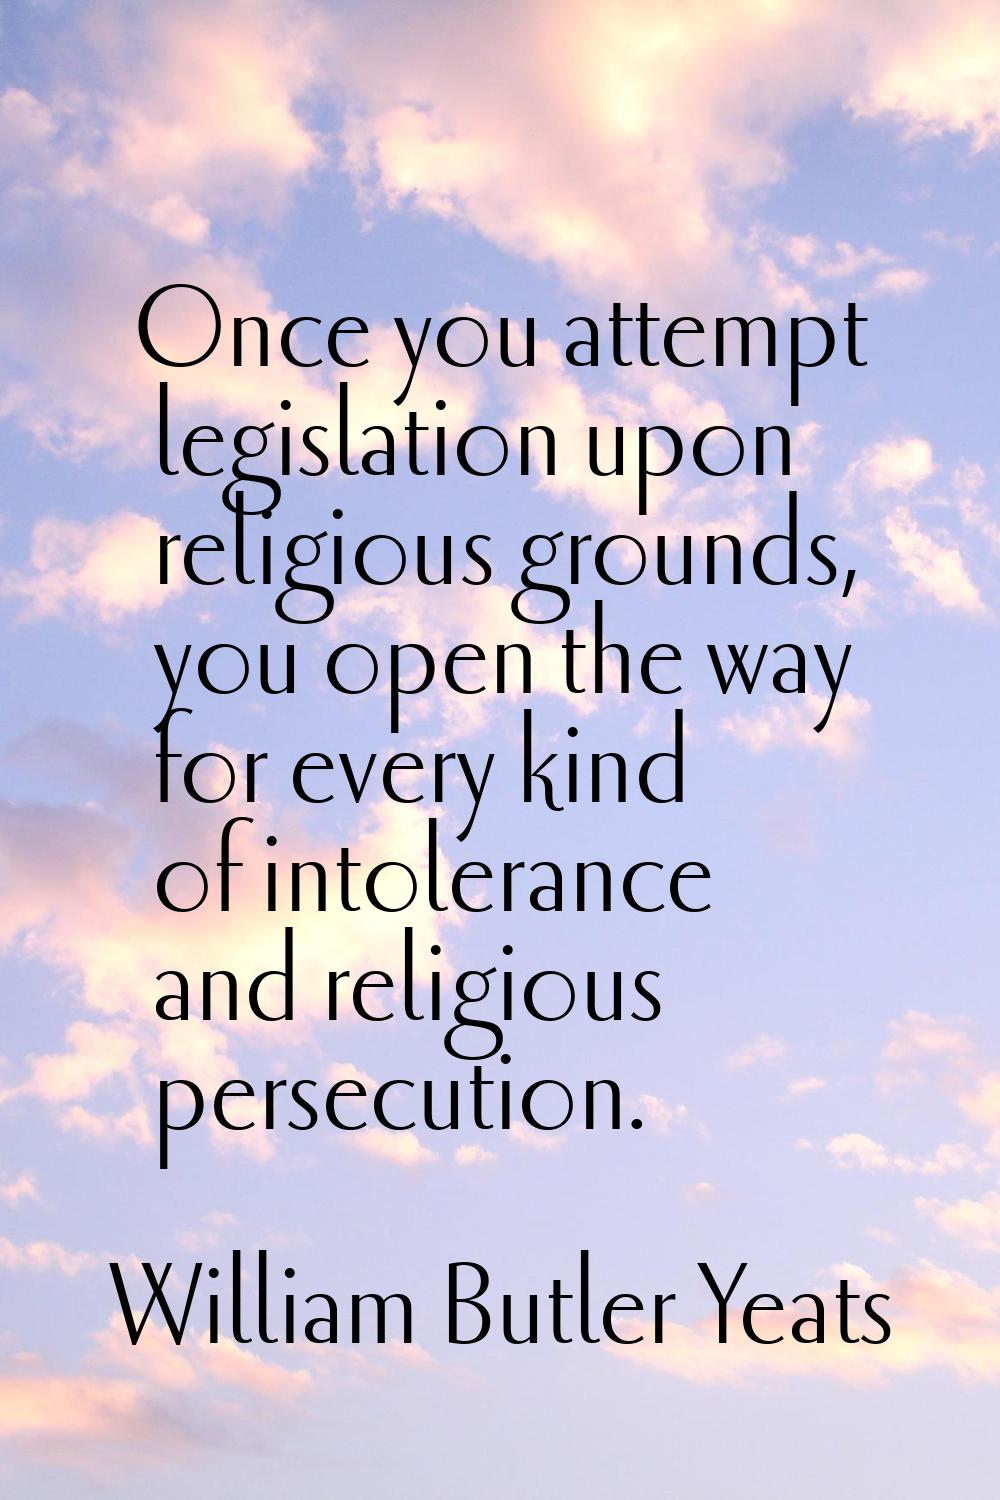 Once you attempt legislation upon religious grounds, you open the way for every kind of intolerance